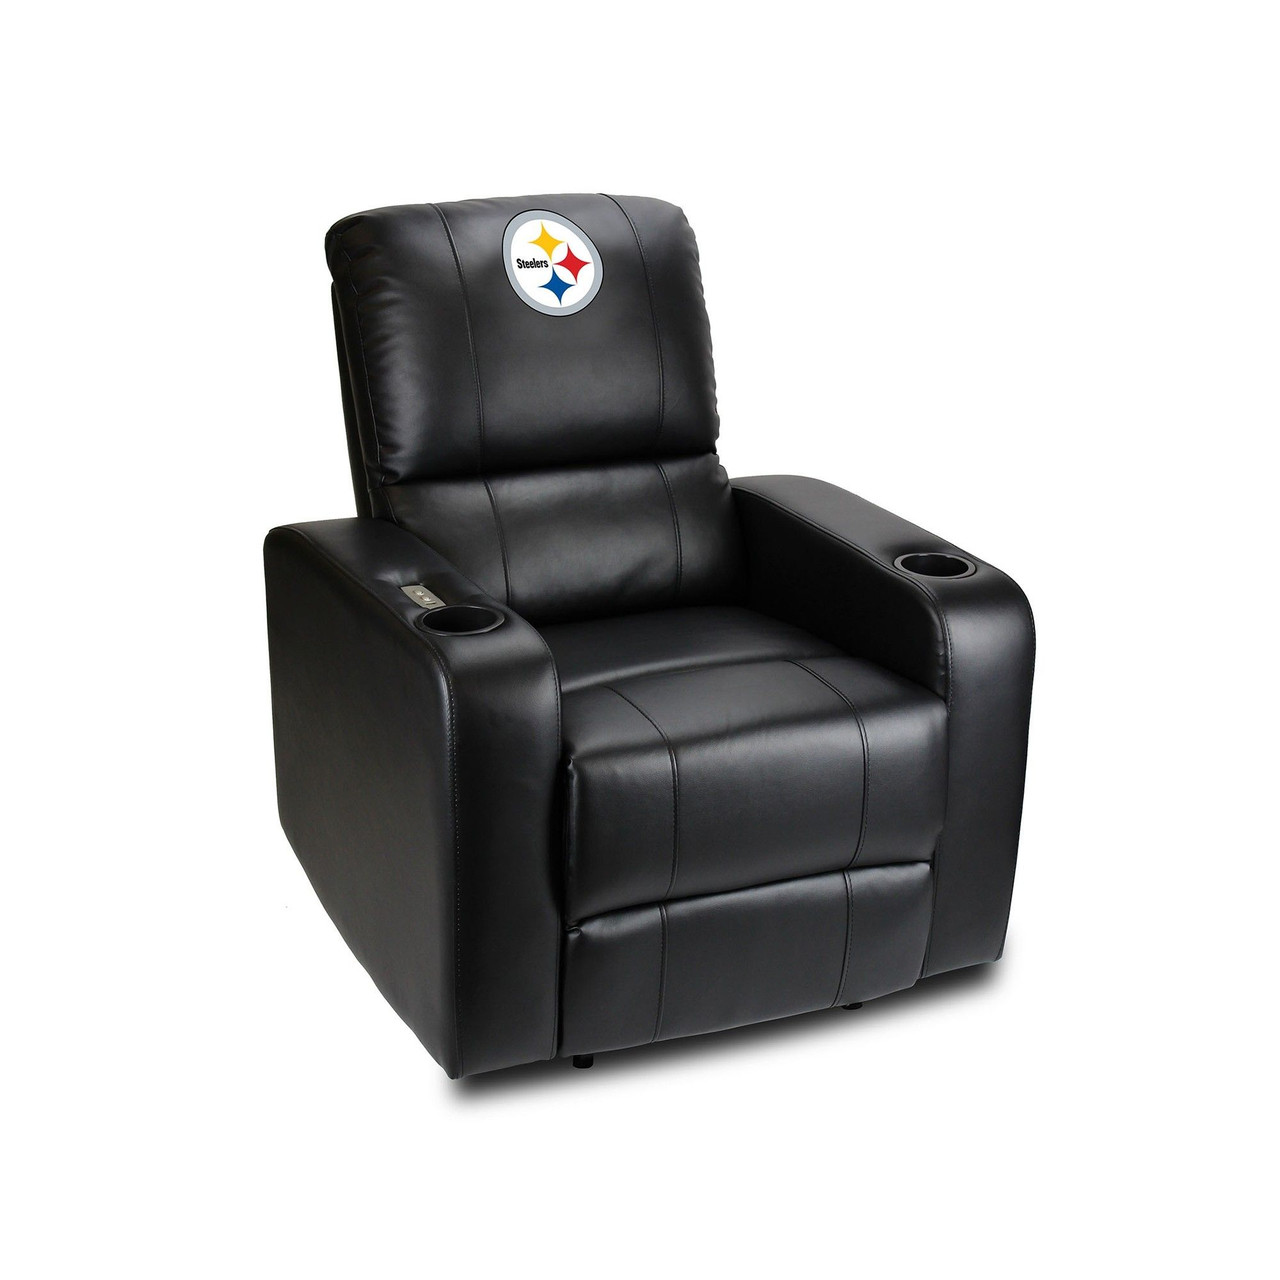 Pittsburgh, Pit, Steelers, 117-1004, Power, Theater, Recliner, Usb Port, Leather, Automatic, NFL, Imperial, 720801170046